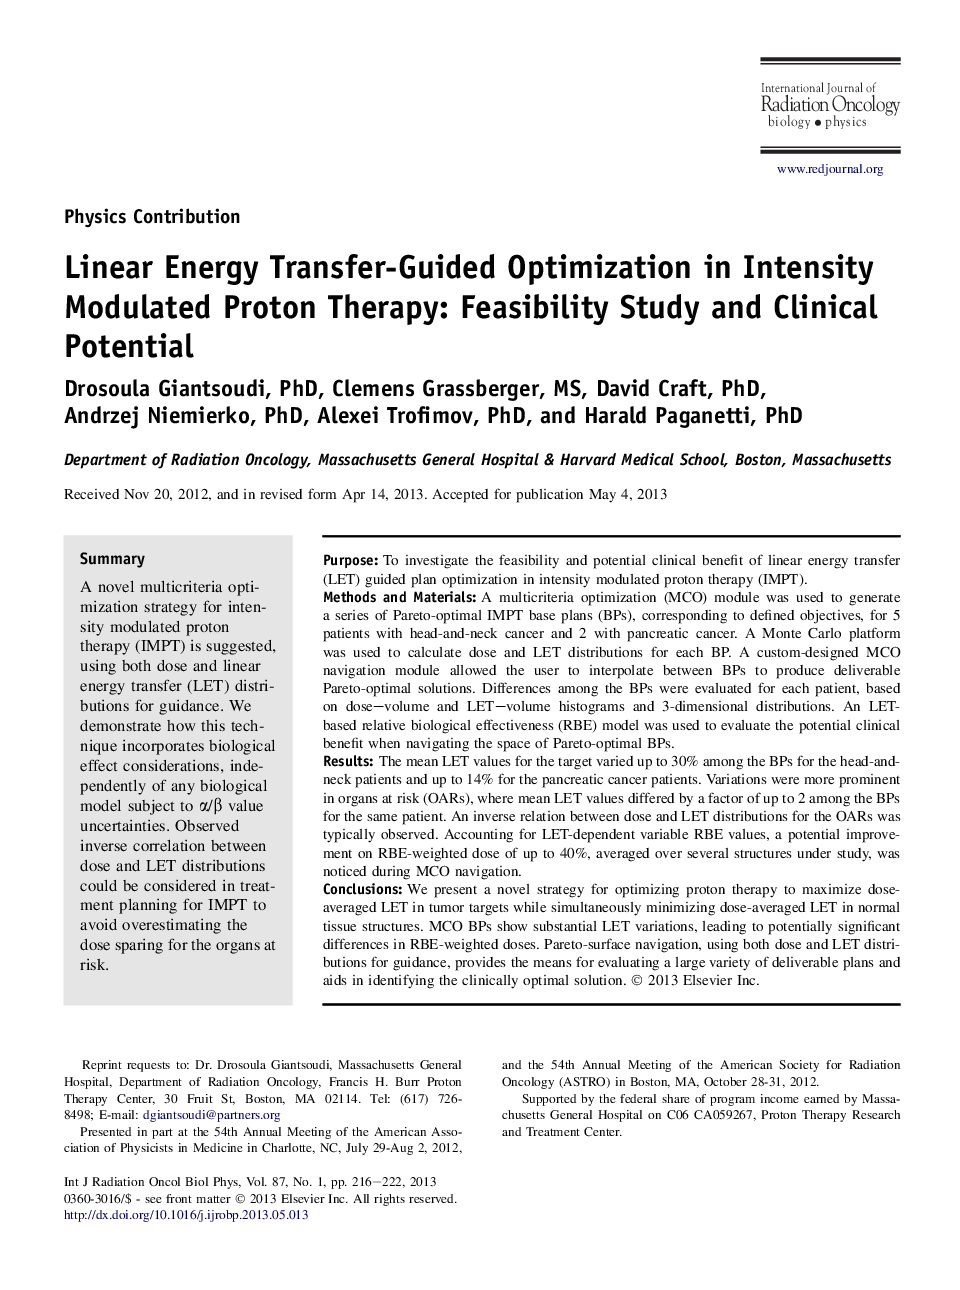 Linear Energy Transfer-Guided Optimization in Intensity Modulated Proton Therapy: Feasibility Study and Clinical Potential